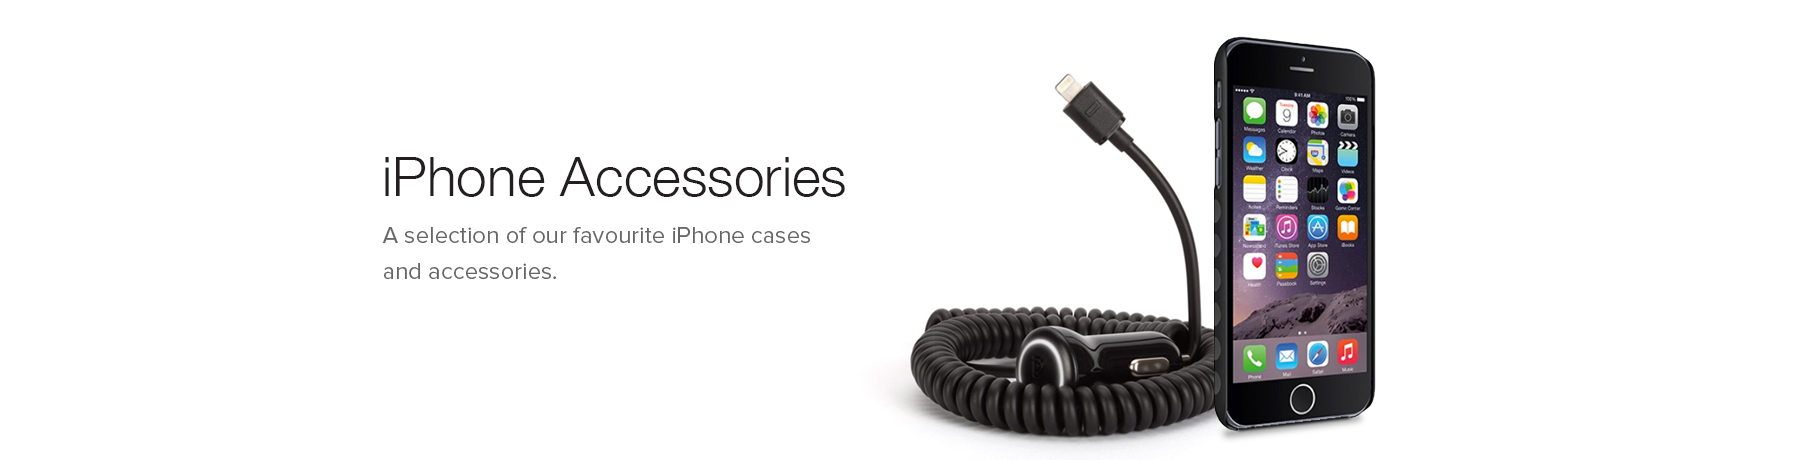 Accessories For iPhone 7